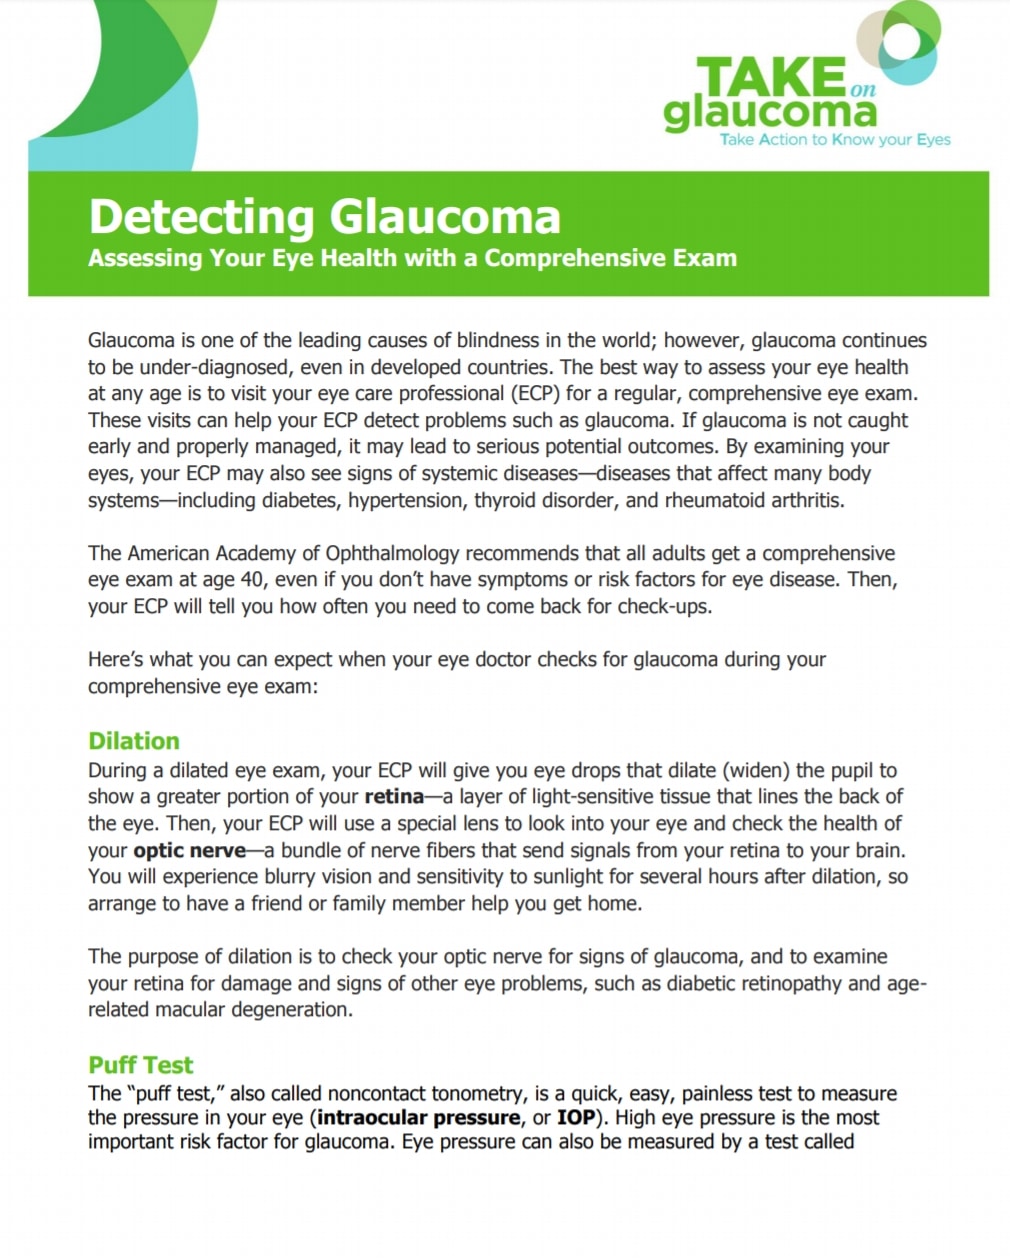 Article on detecting glaucoma.